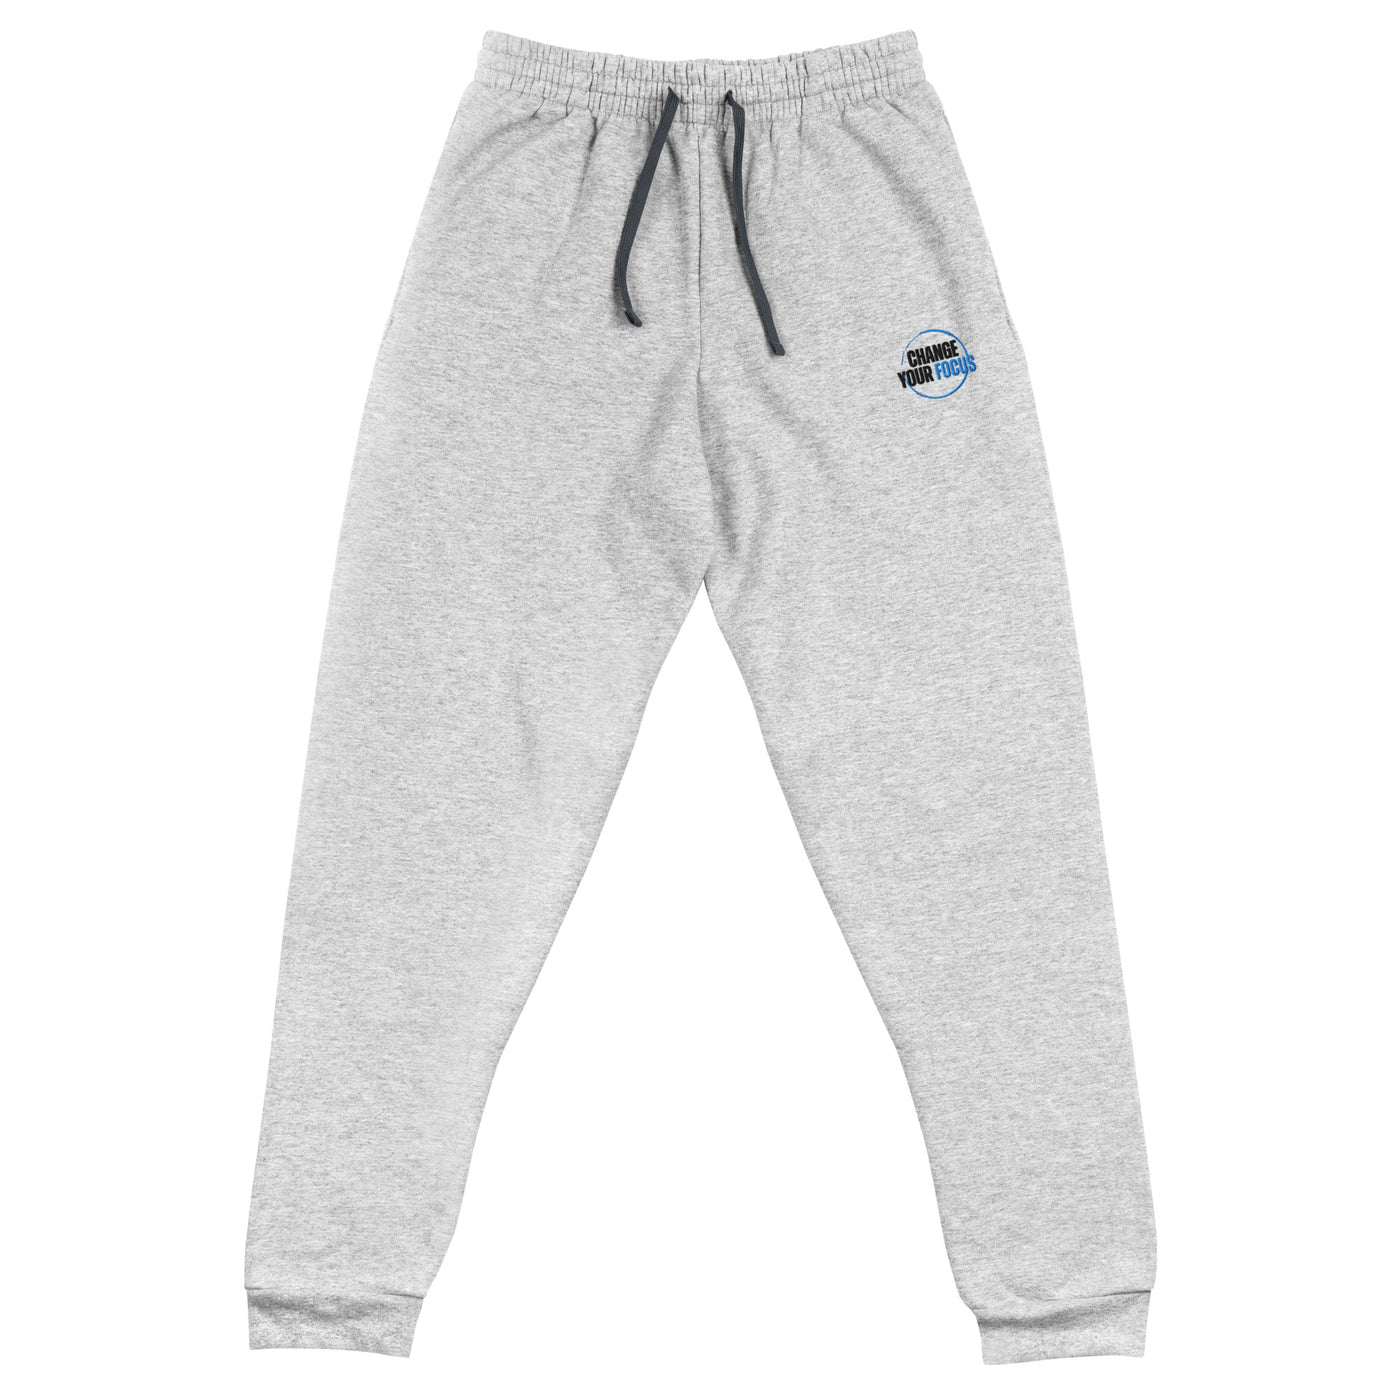 Men's Athletic Heather Embroidered Joggers - Change Your Focus